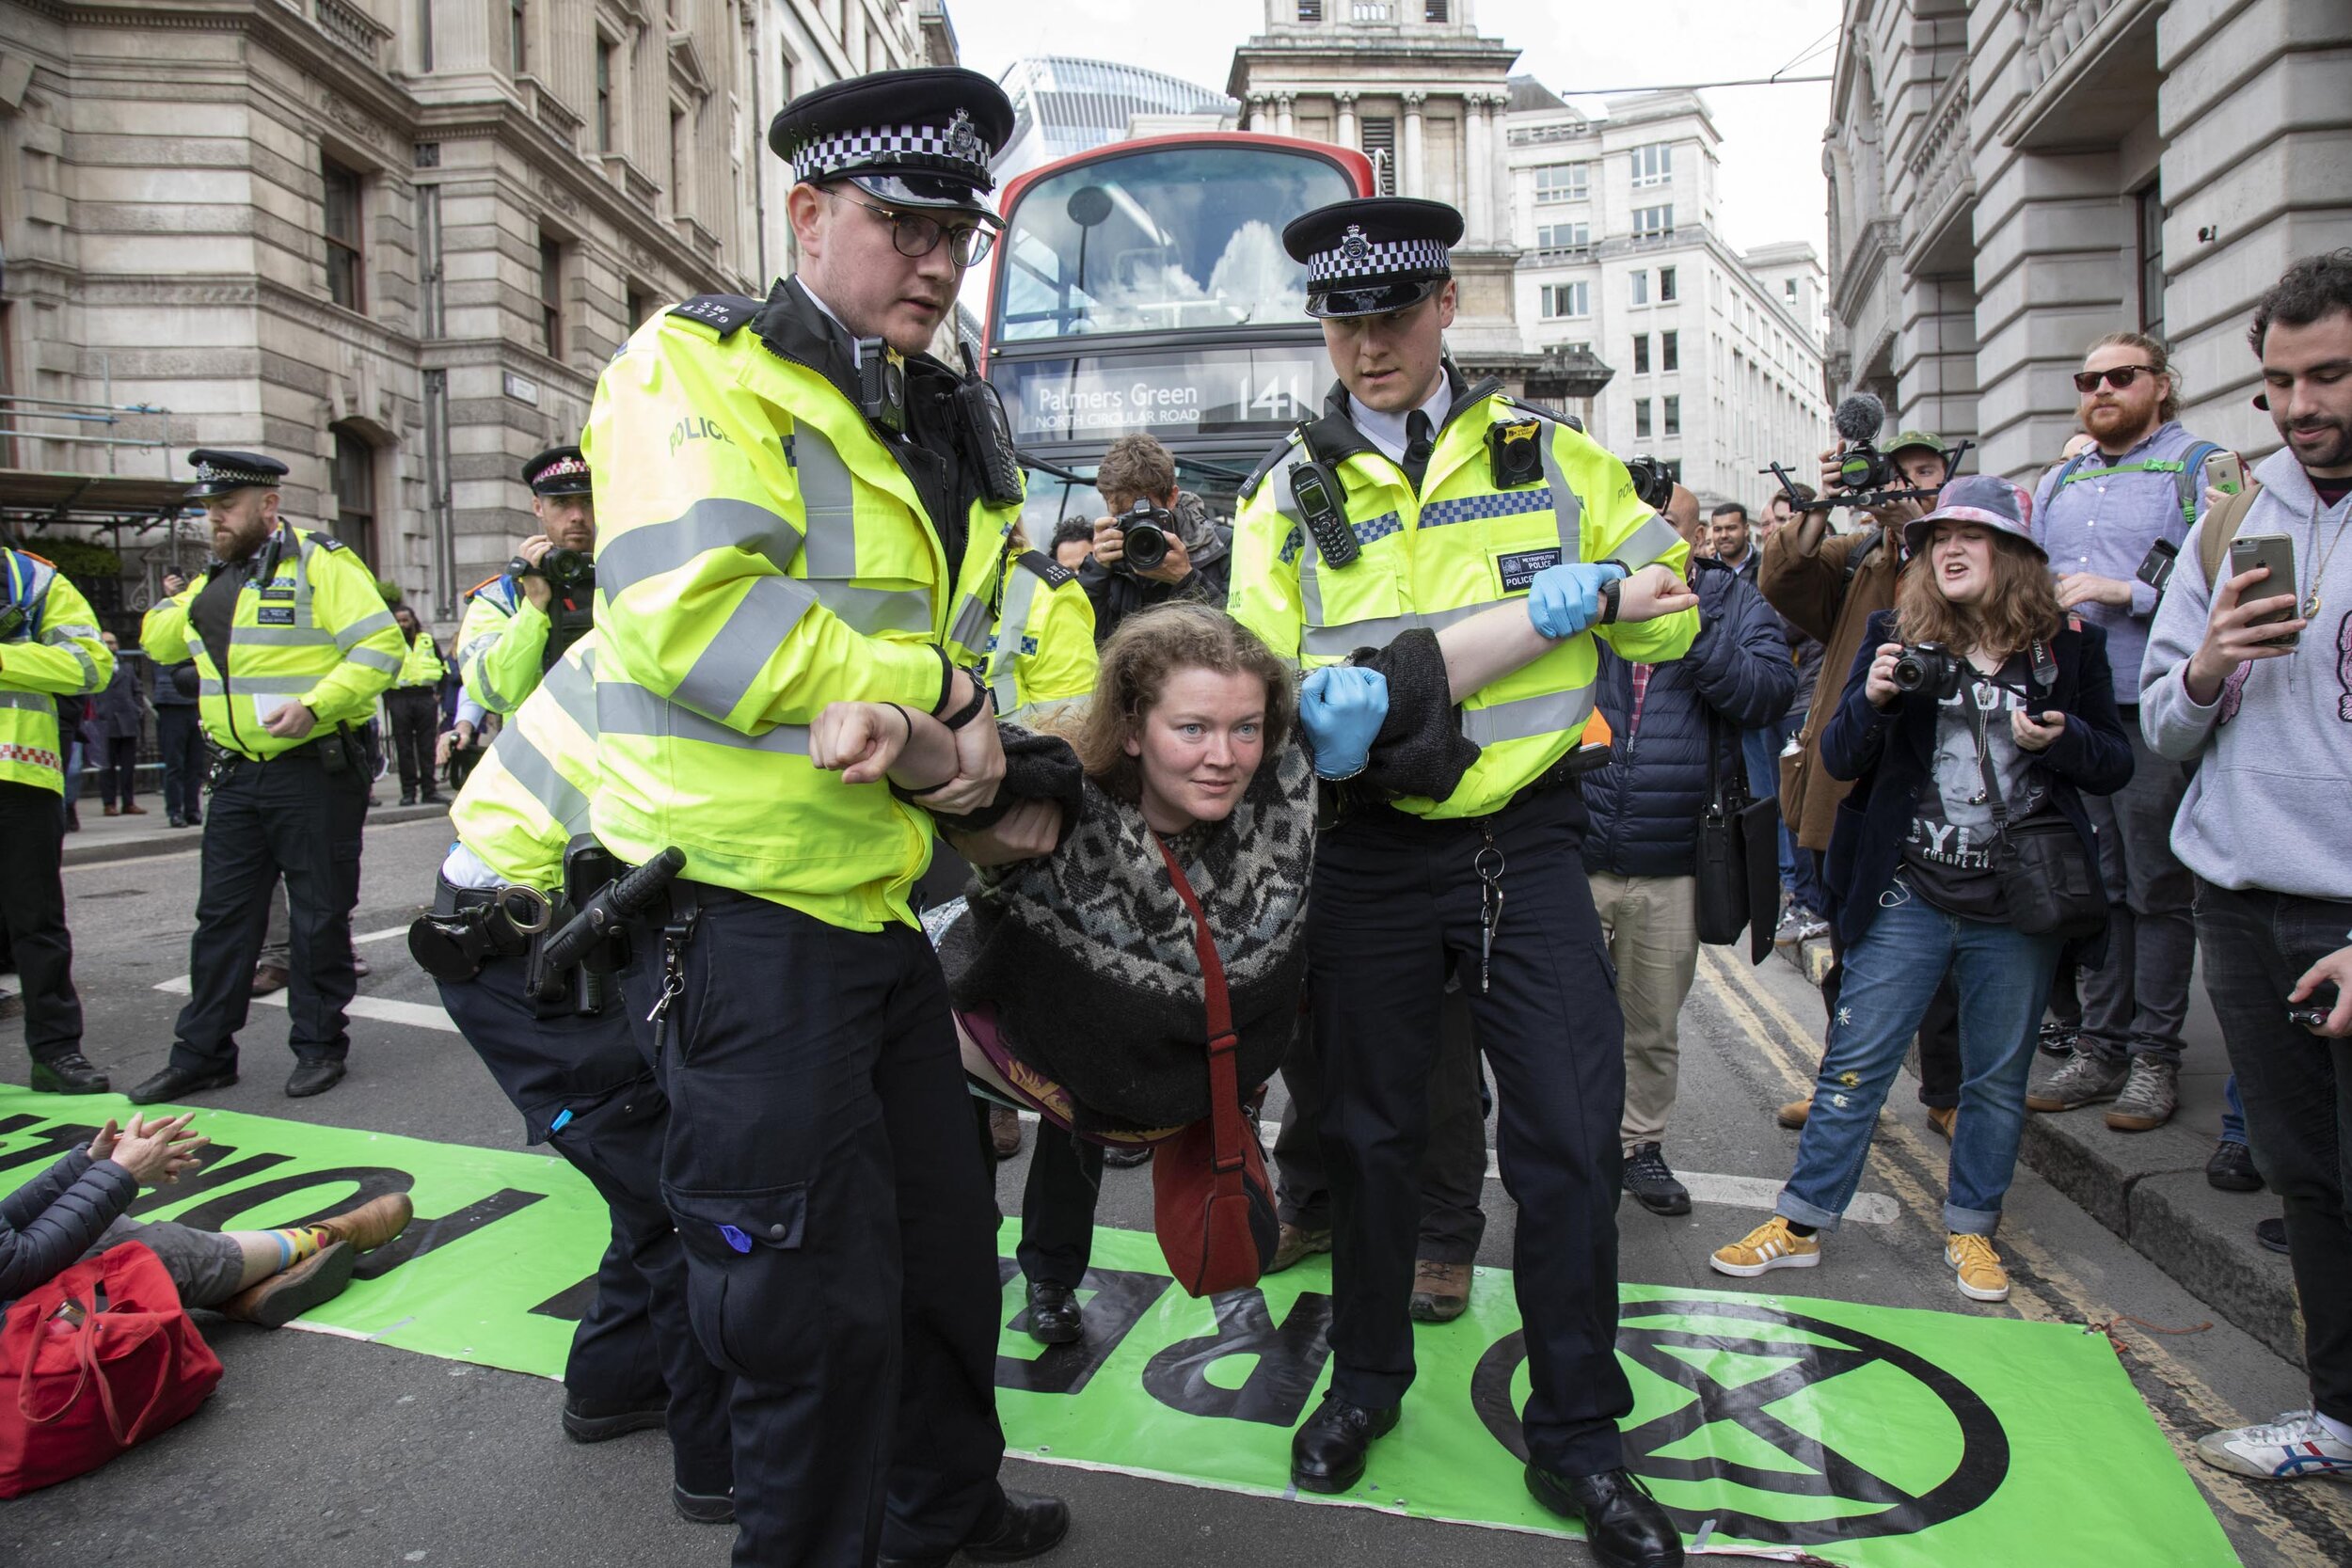  Activist is arrested for blocking the street at Bank in the heart of the City of London in protest that the government is not doing enough to avoid catastrophic climate change. 